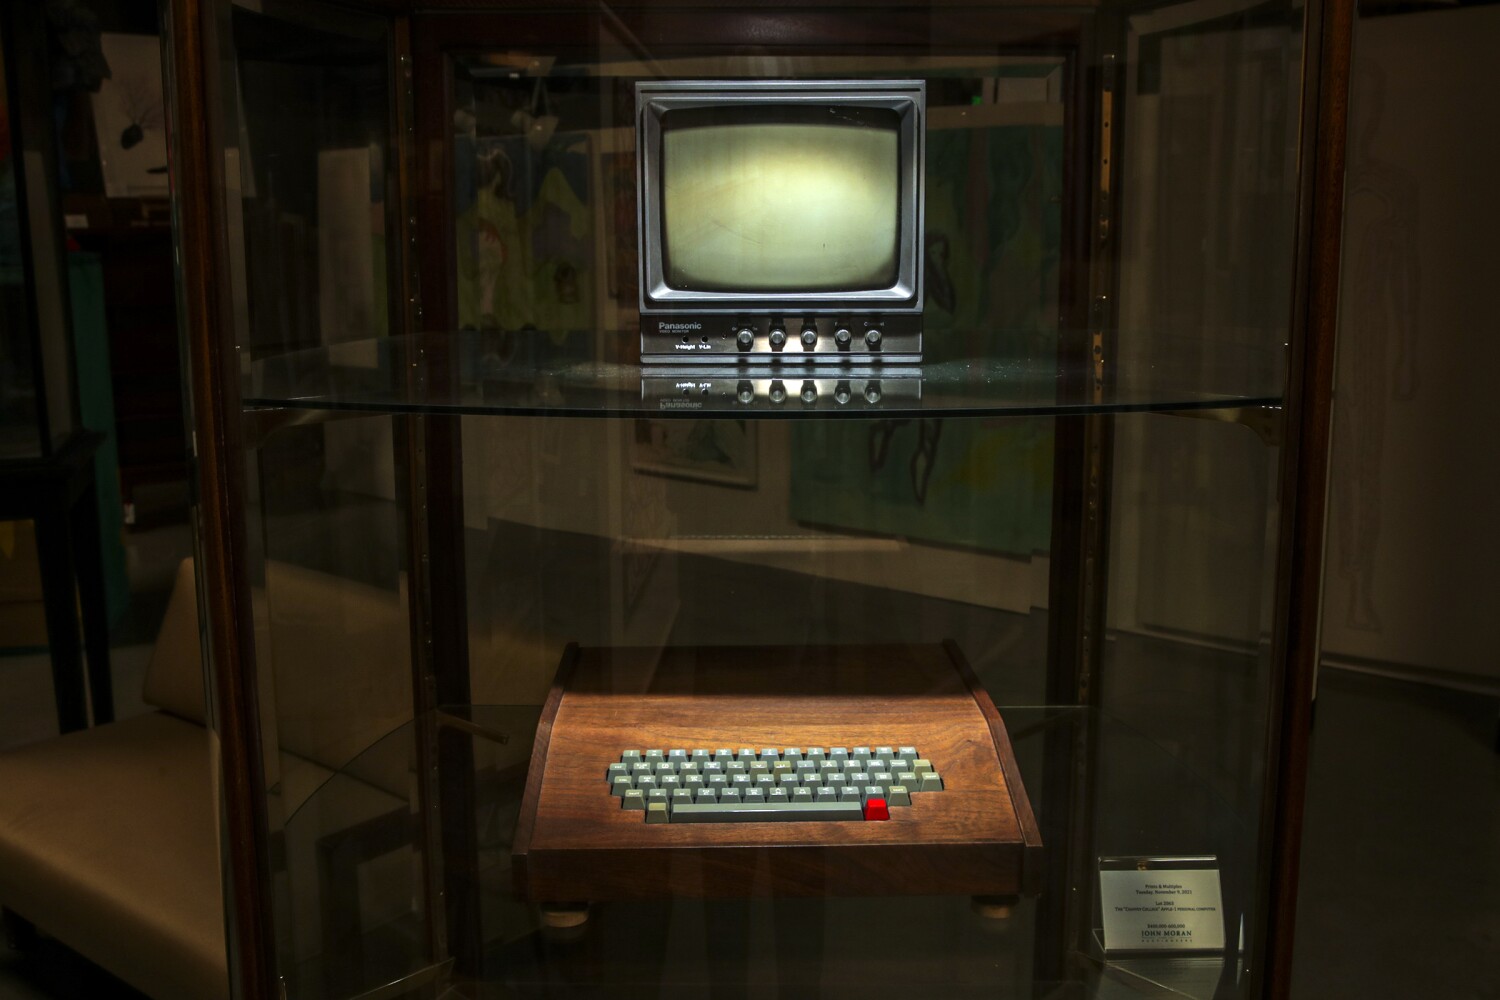 Apple computer built by Wozniak and Jobs fetches $500,000 at Southern California auction